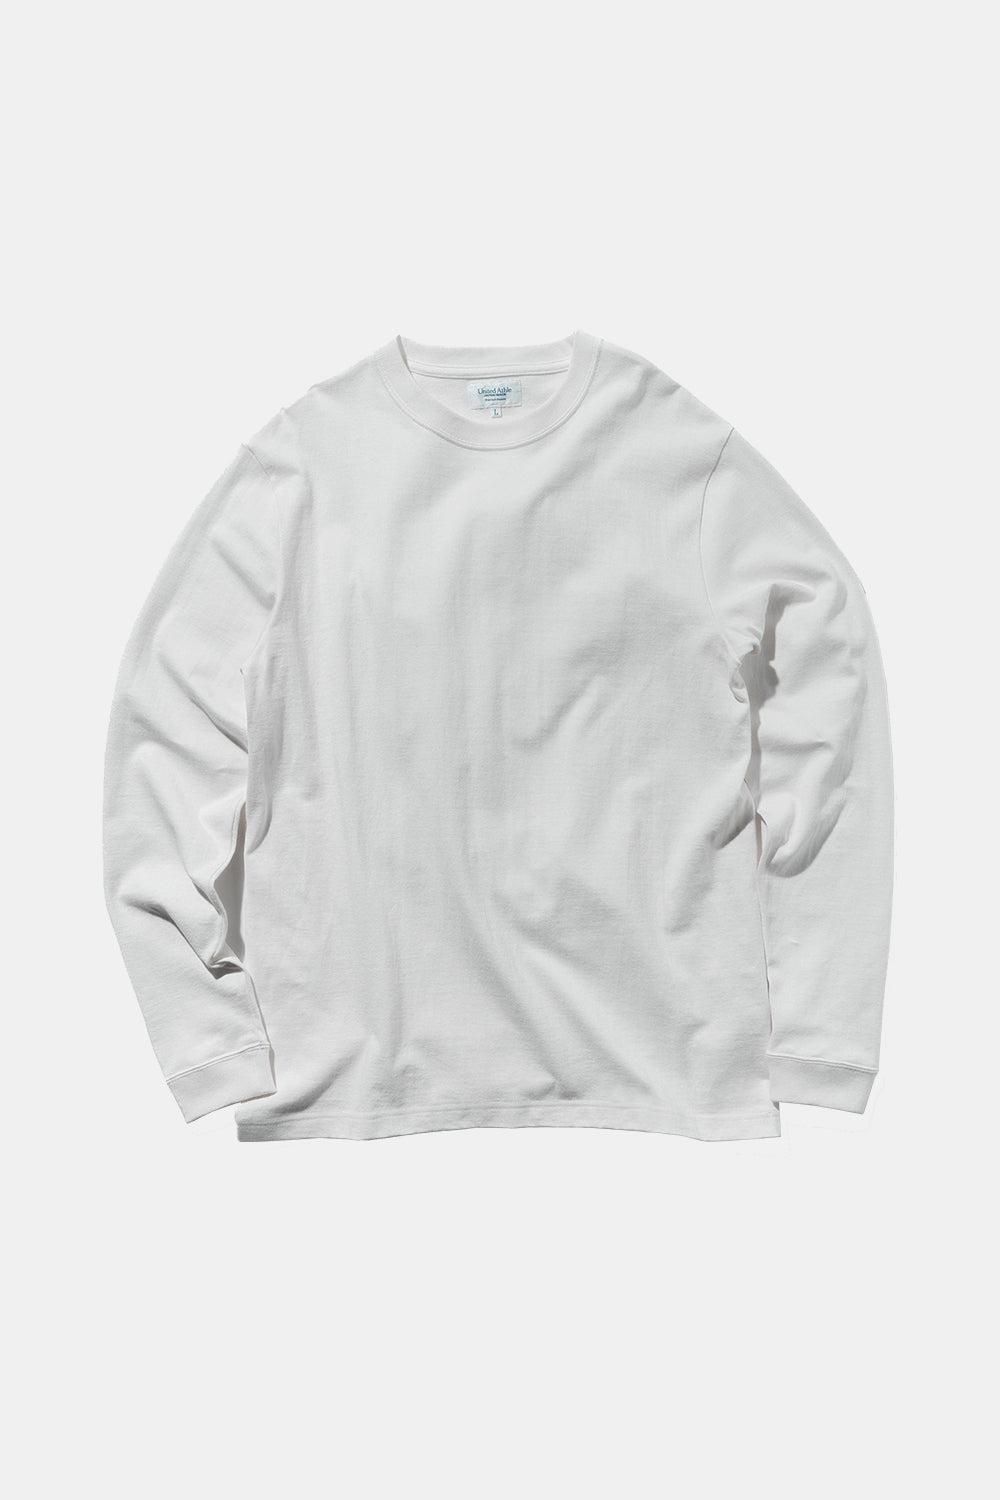 United Athle Japan Made Standard Fit Long Sleeve T-shirt (White)